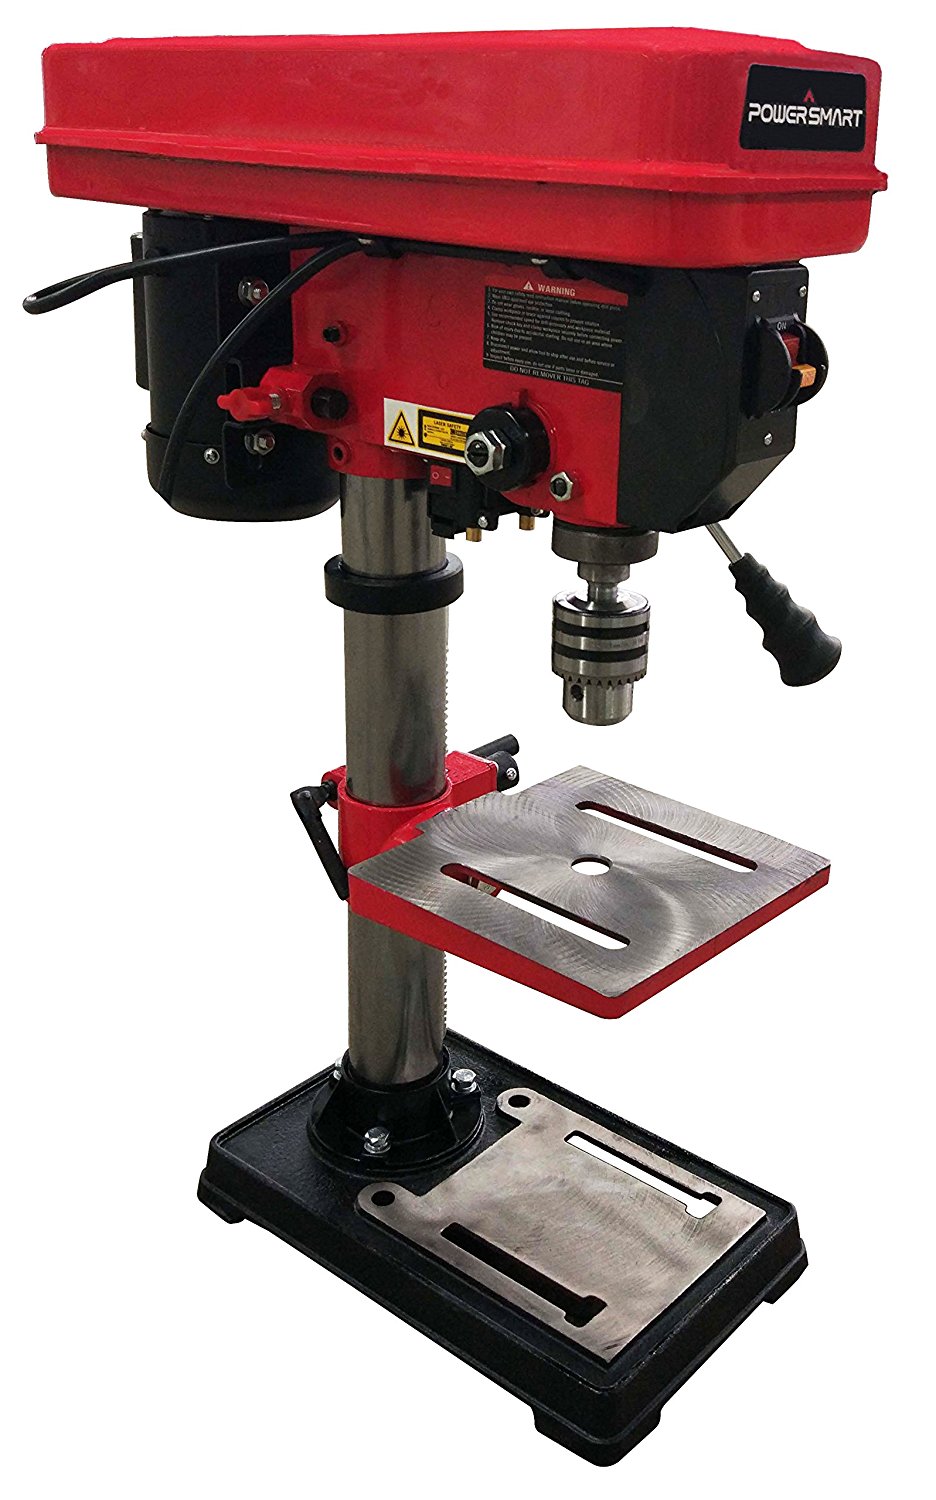 PowerSmart PS310 12-Speed Drill Press with Laser Guide, 10